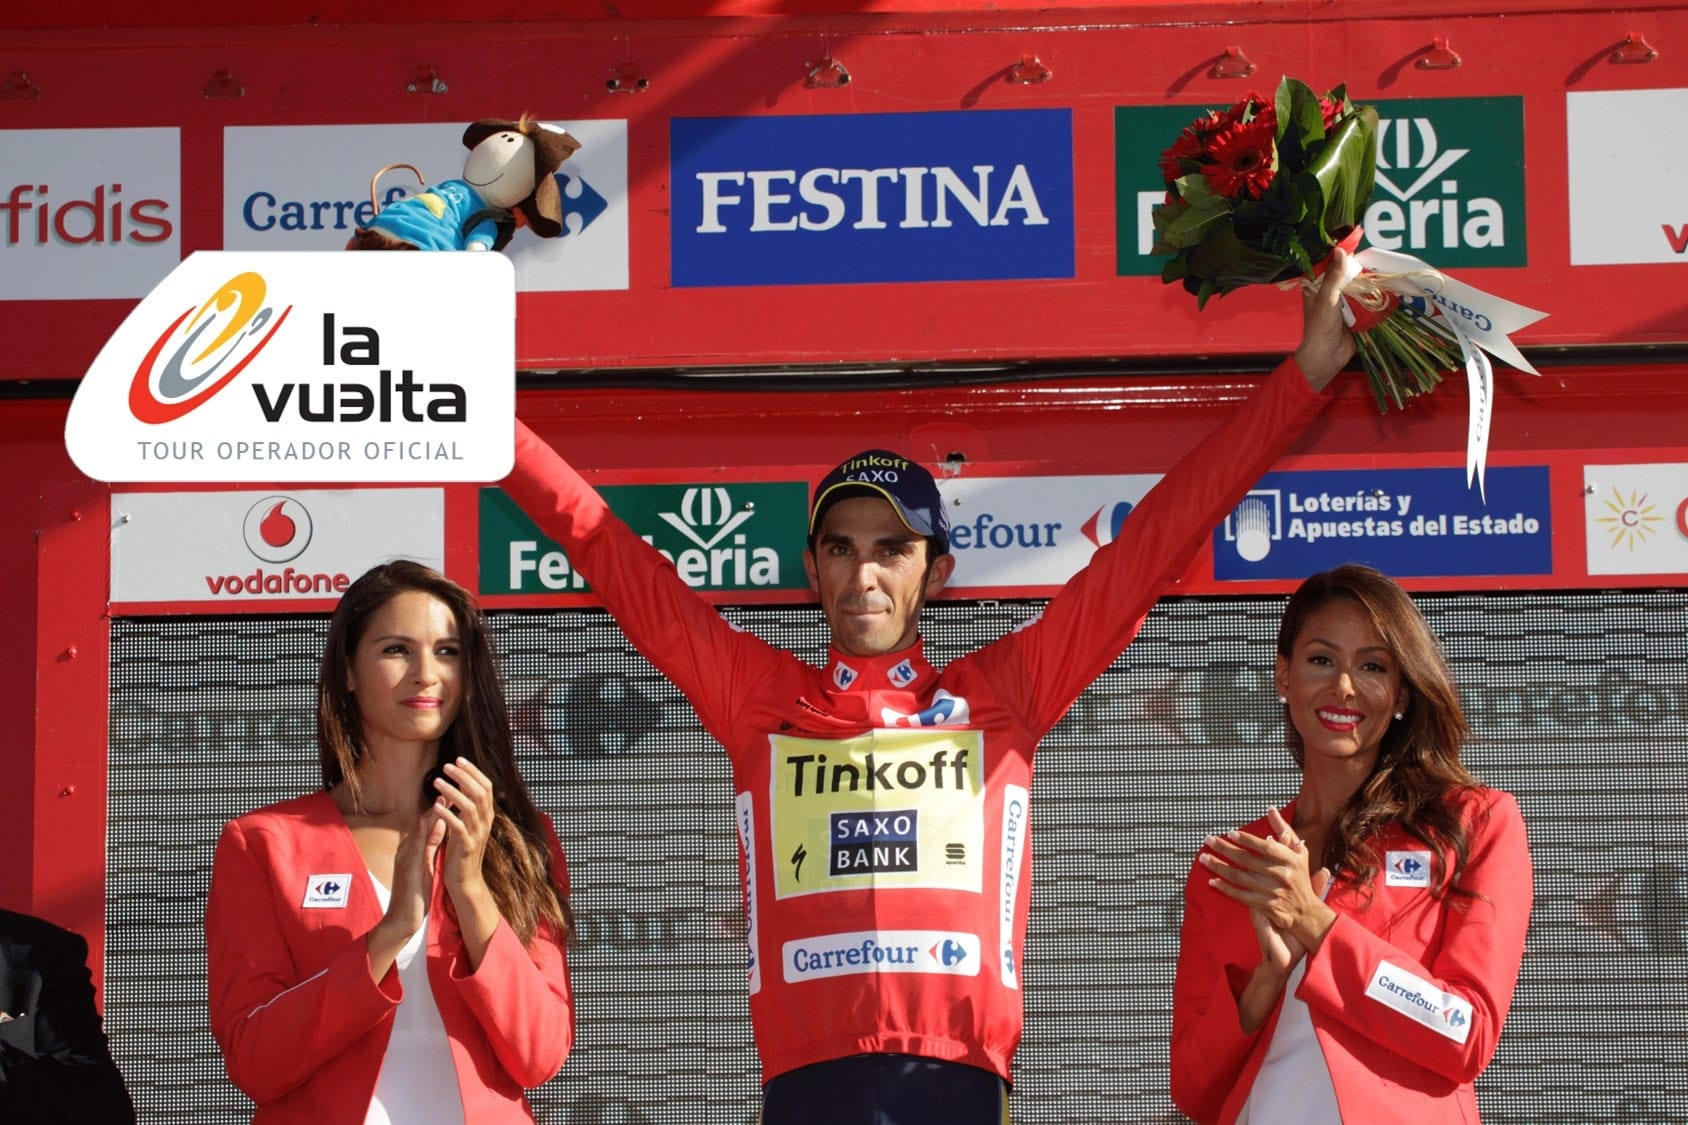 vuelta front page image v2